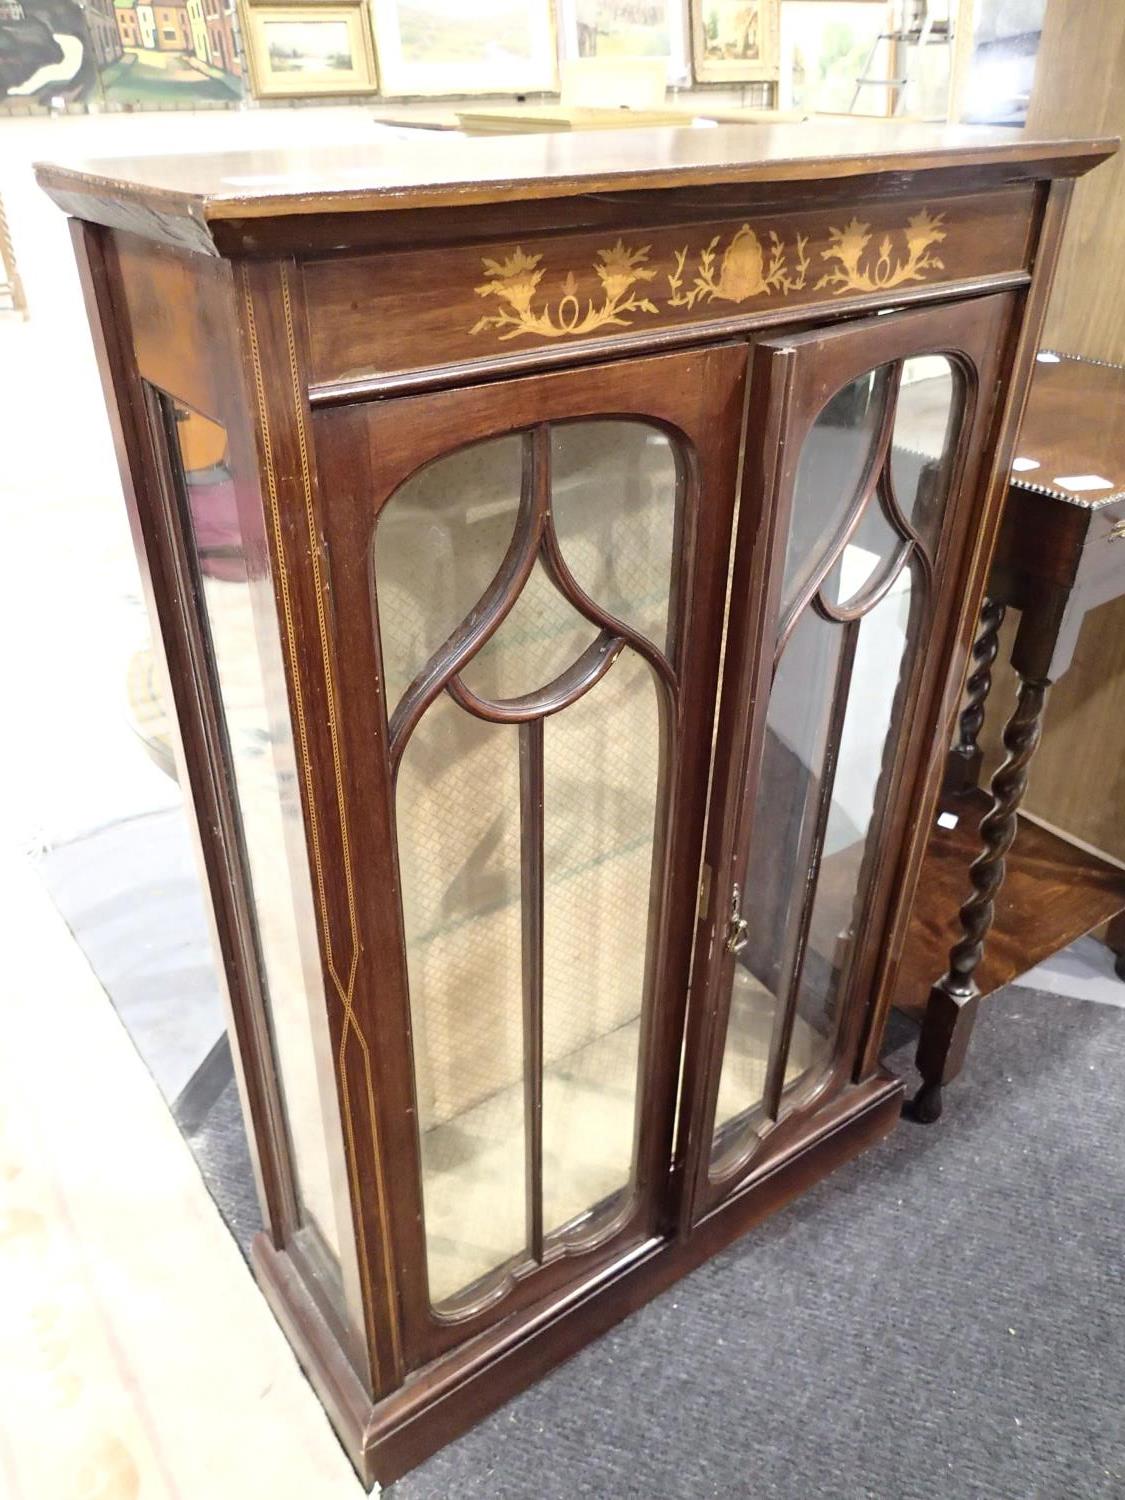 Glass fronted cabinet with inlaid decoration W: 63 cm